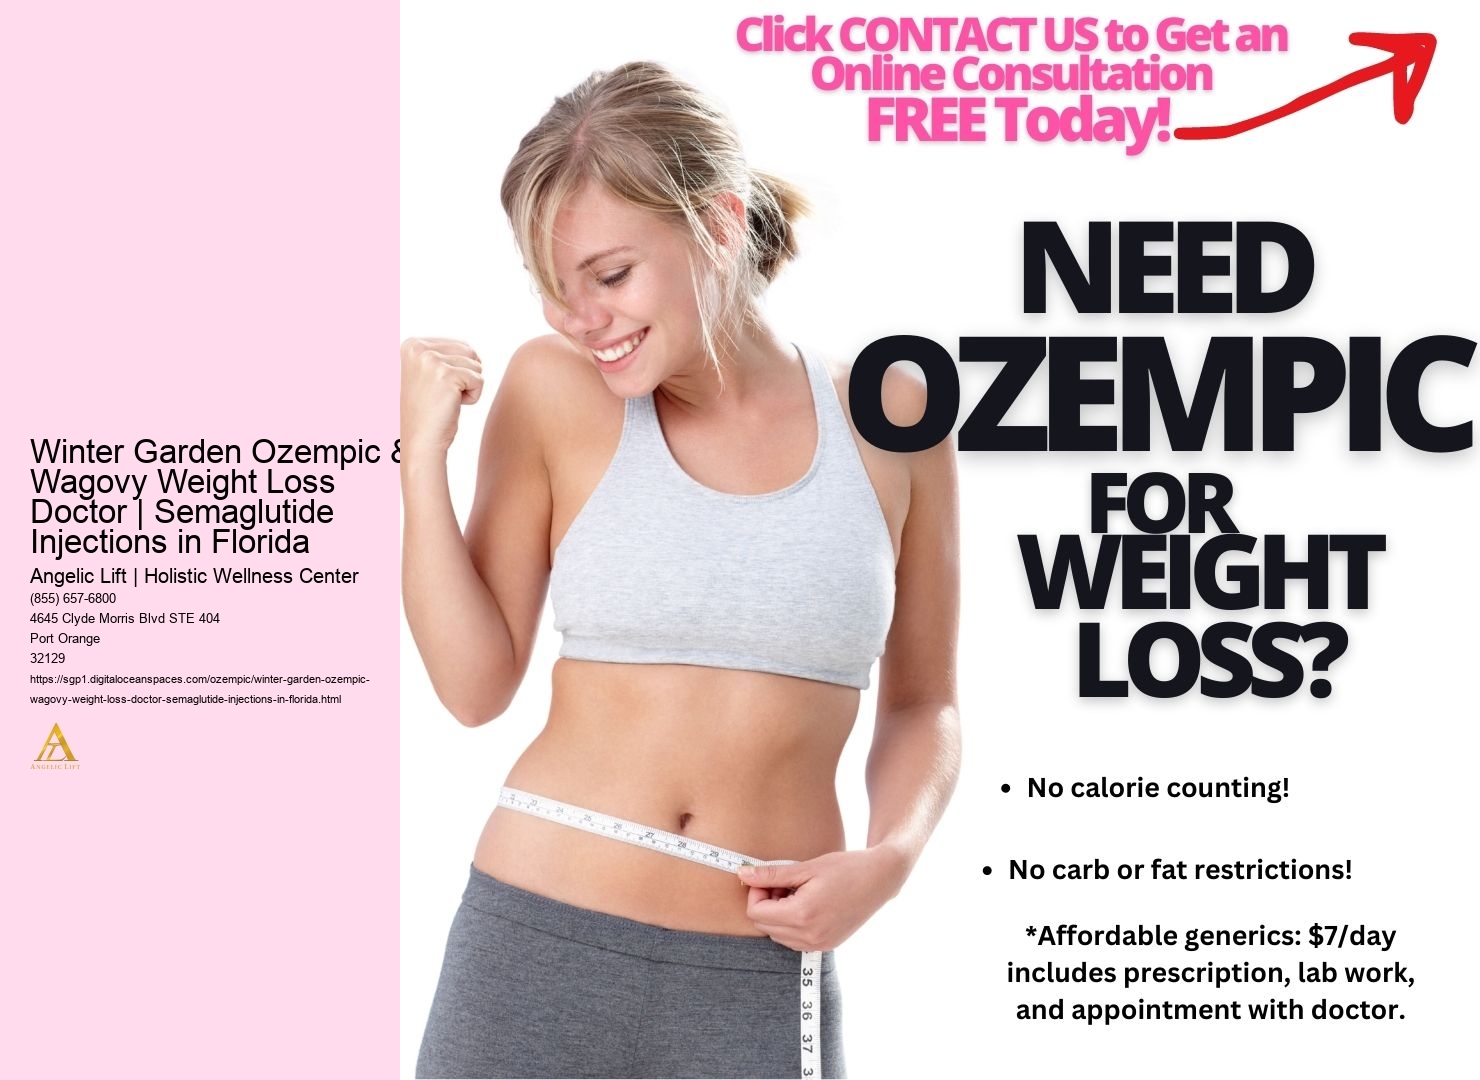 Winter Garden Ozempic & Wagovy Weight Loss Doctor | Semaglutide Injections in Florida